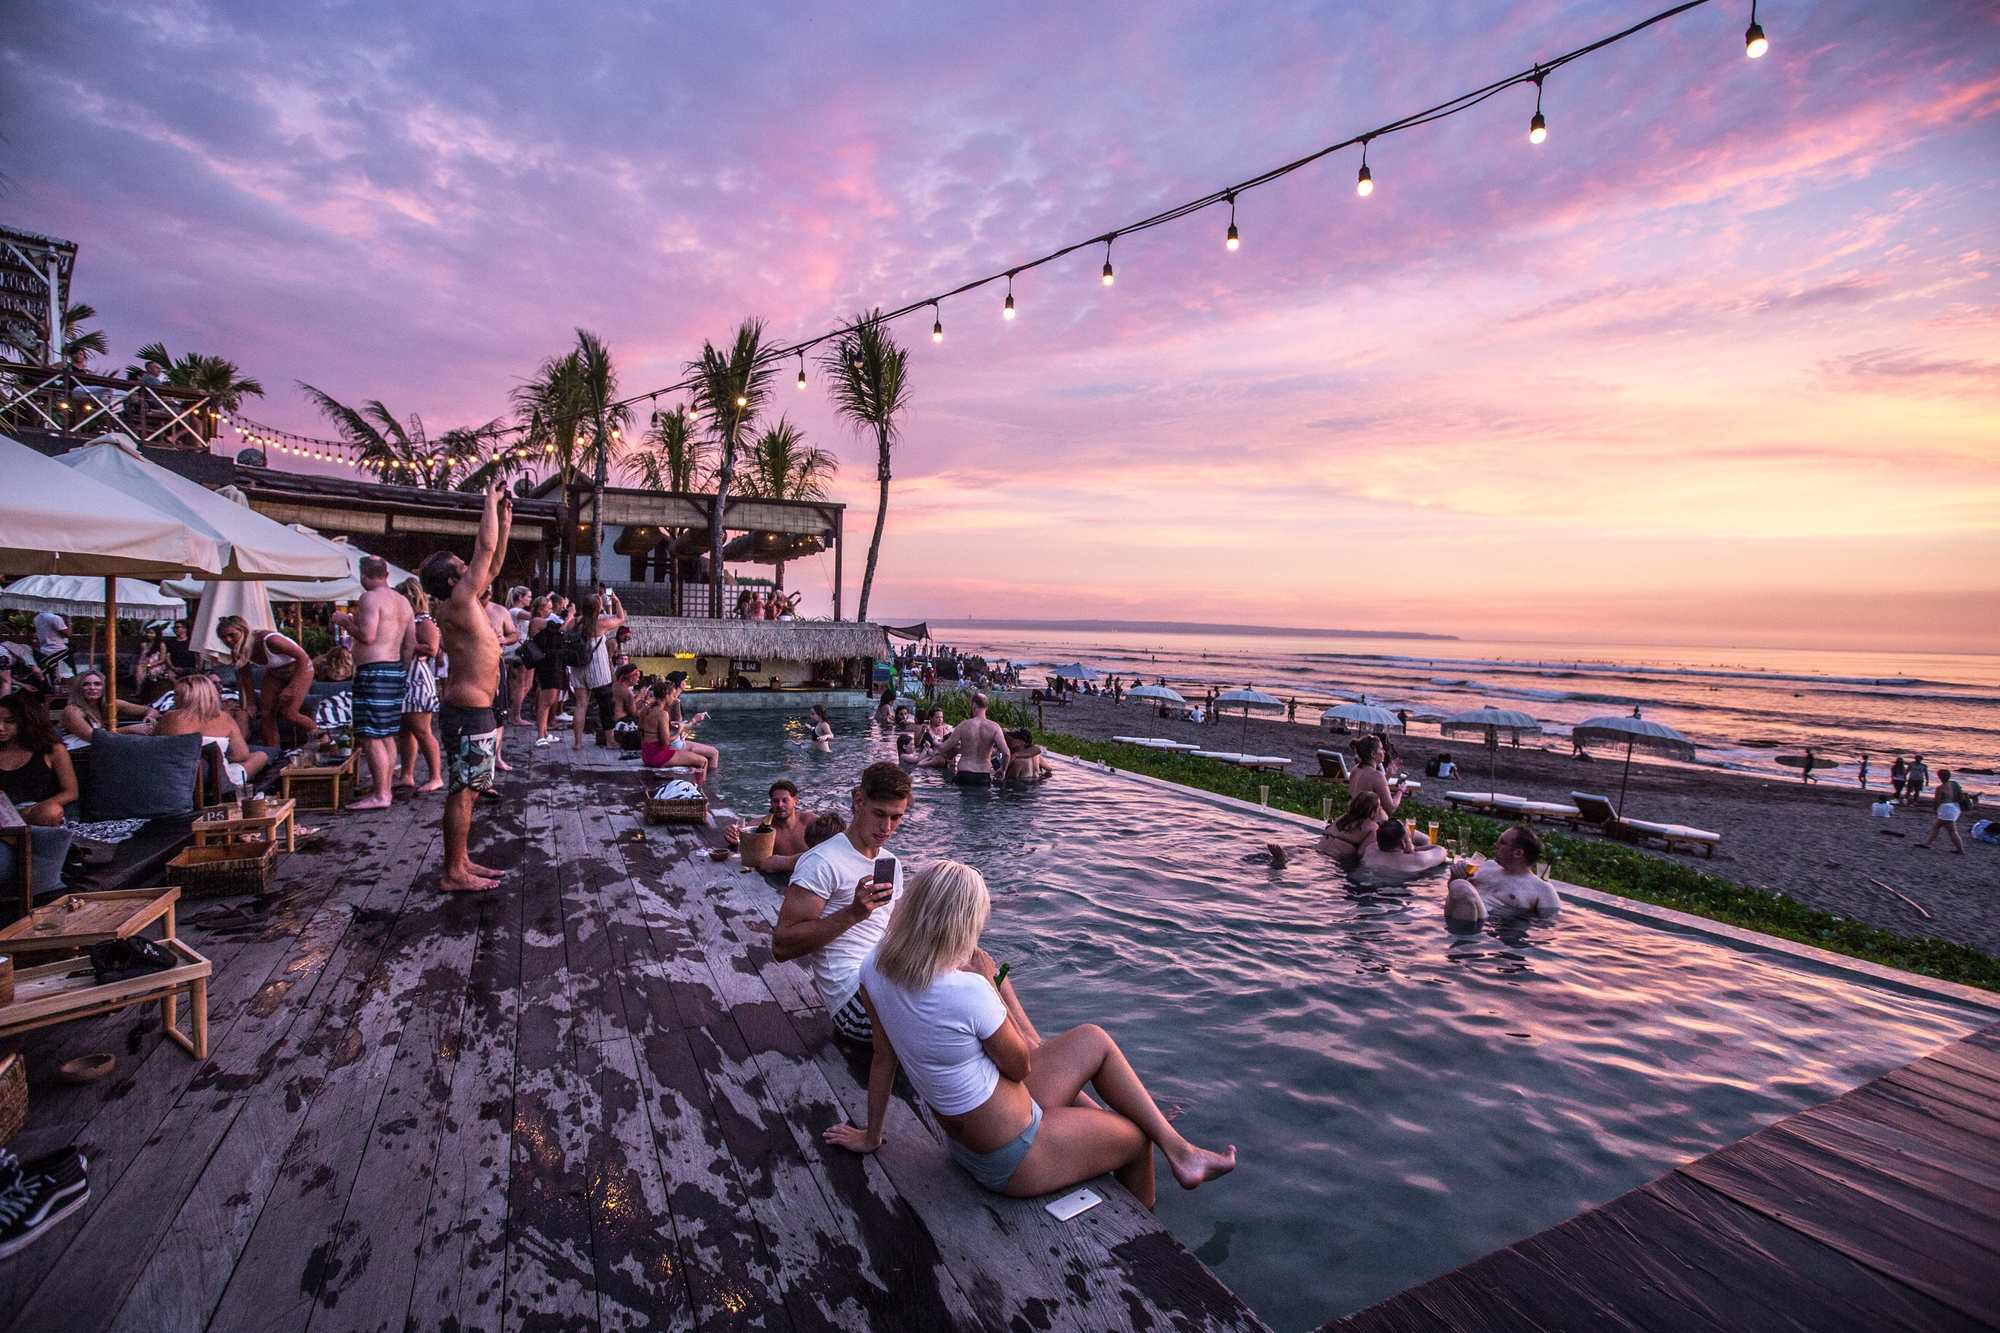 people in and around a pool on a beach at sunset in bali